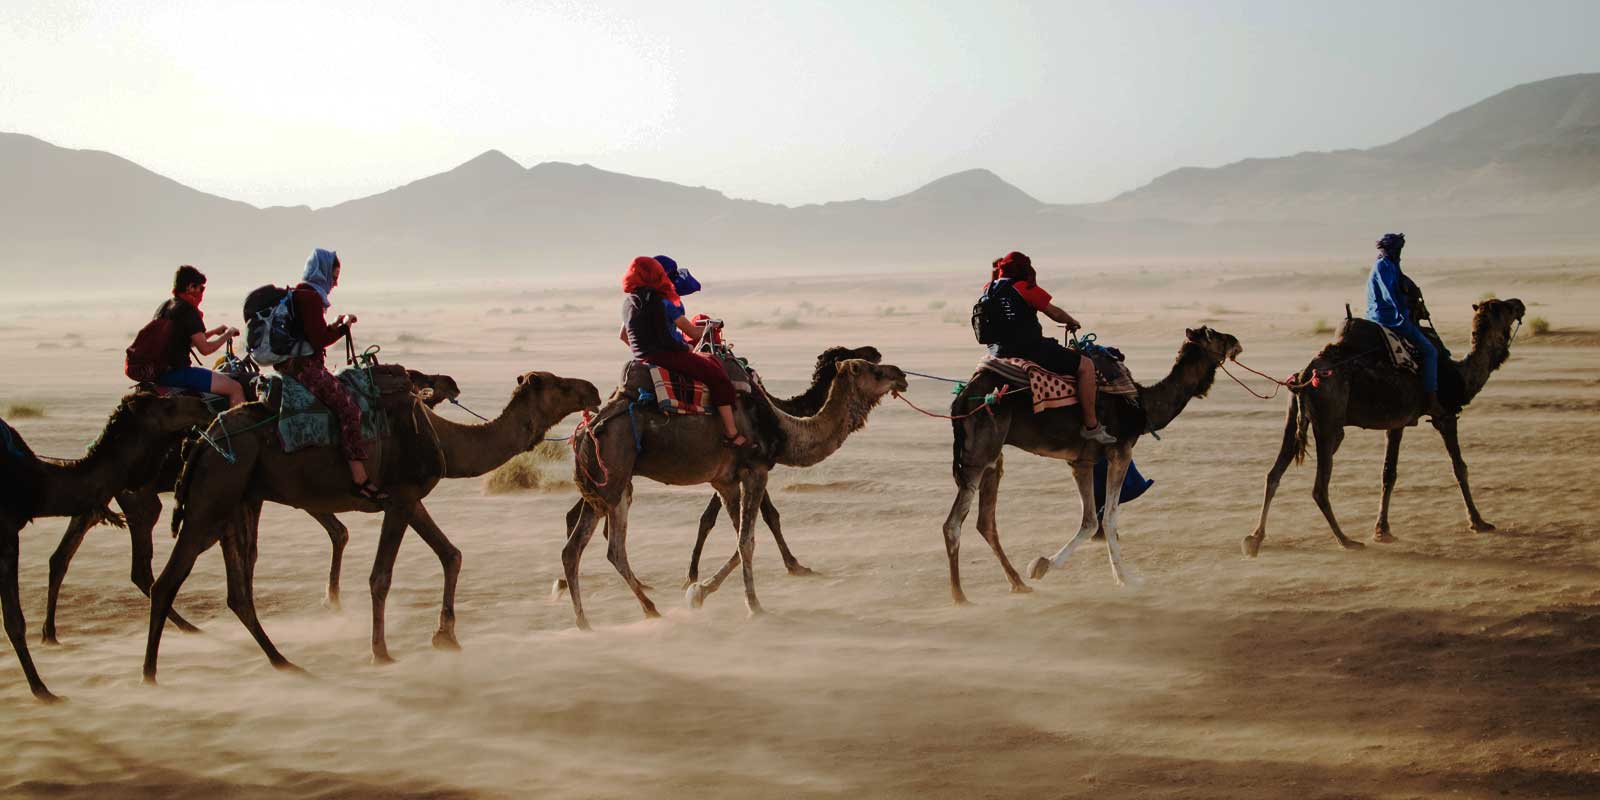 Ride camels, explore souks, sip mint tea, and much more in beautiful Morocco.